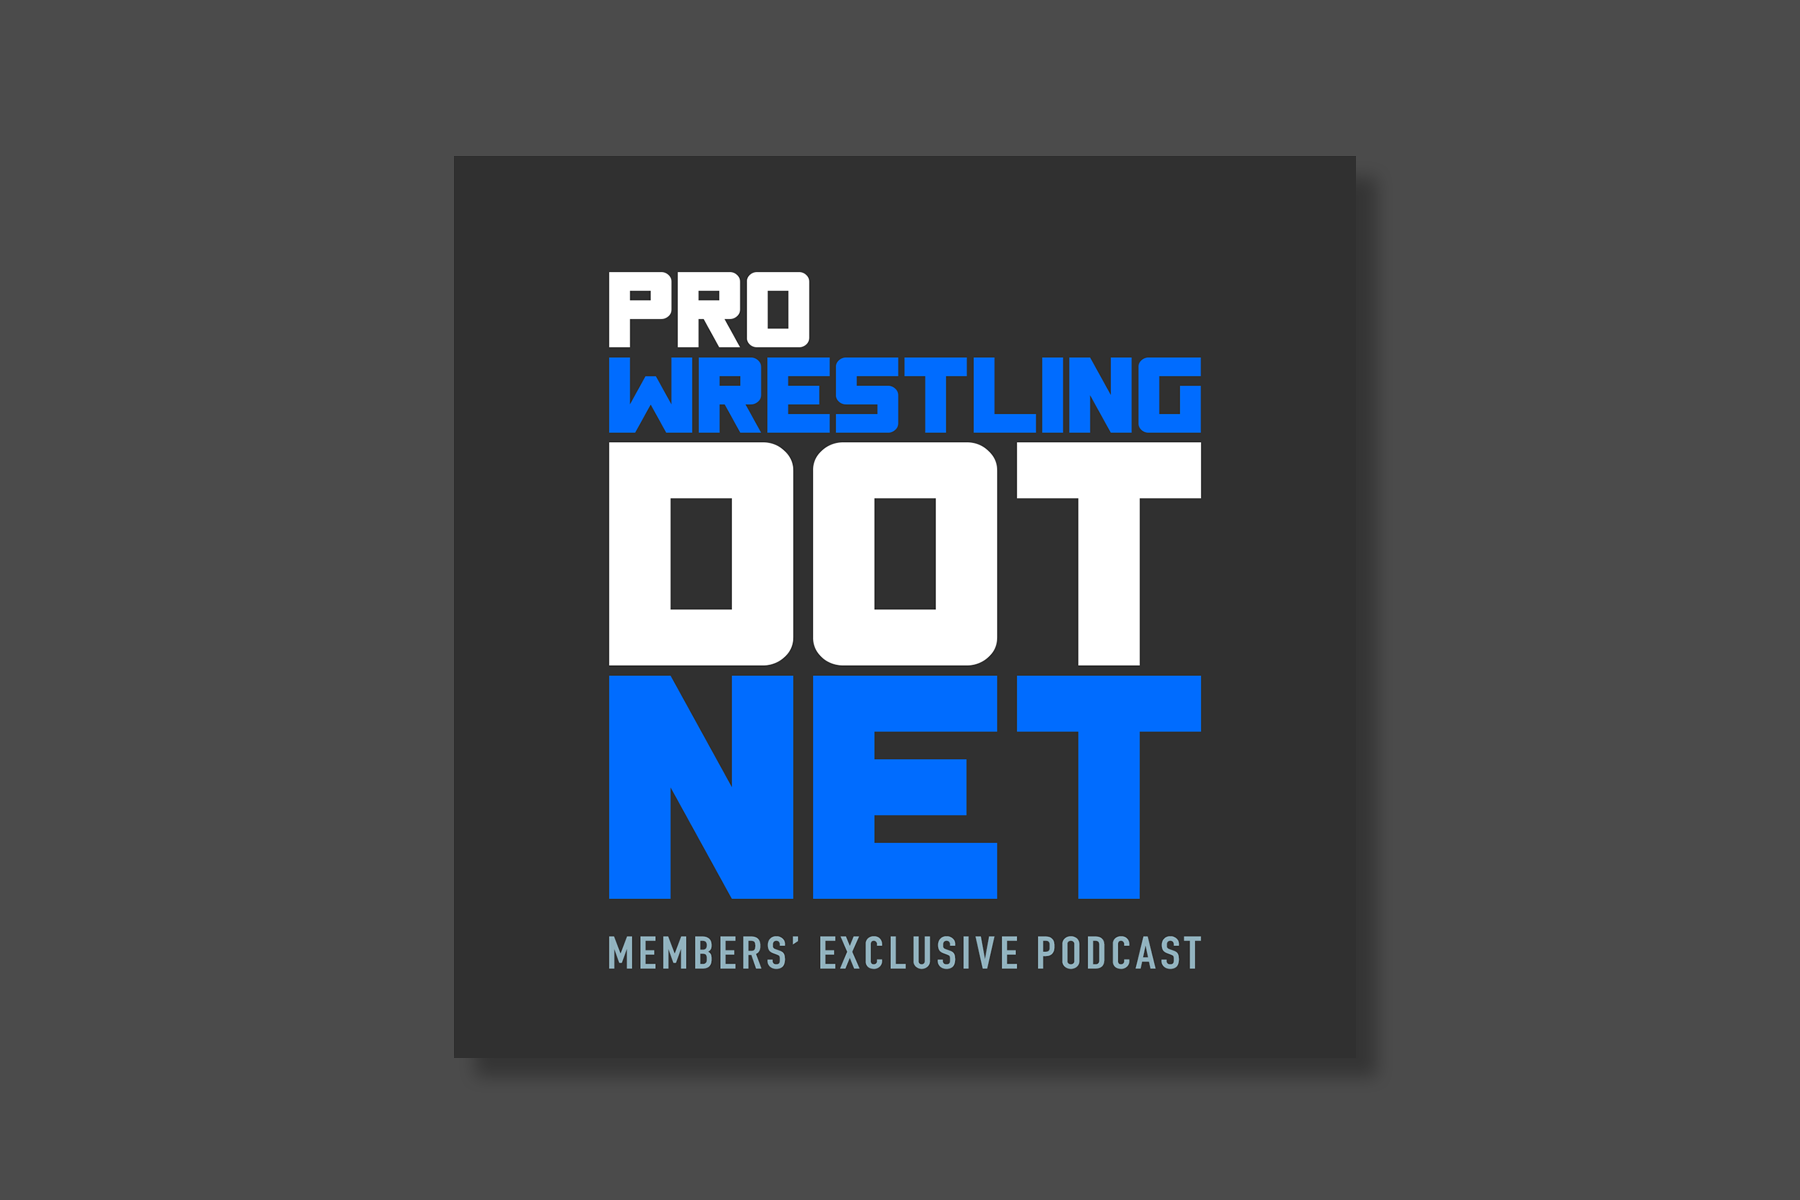 09/07 Dot Net Weekly audio show: Barnett and Powell on Endeavor taking over WWE next week, the fallout from AEW firing CM Punk, the death of Adnan Al-Kaissie, AEW Dynamite